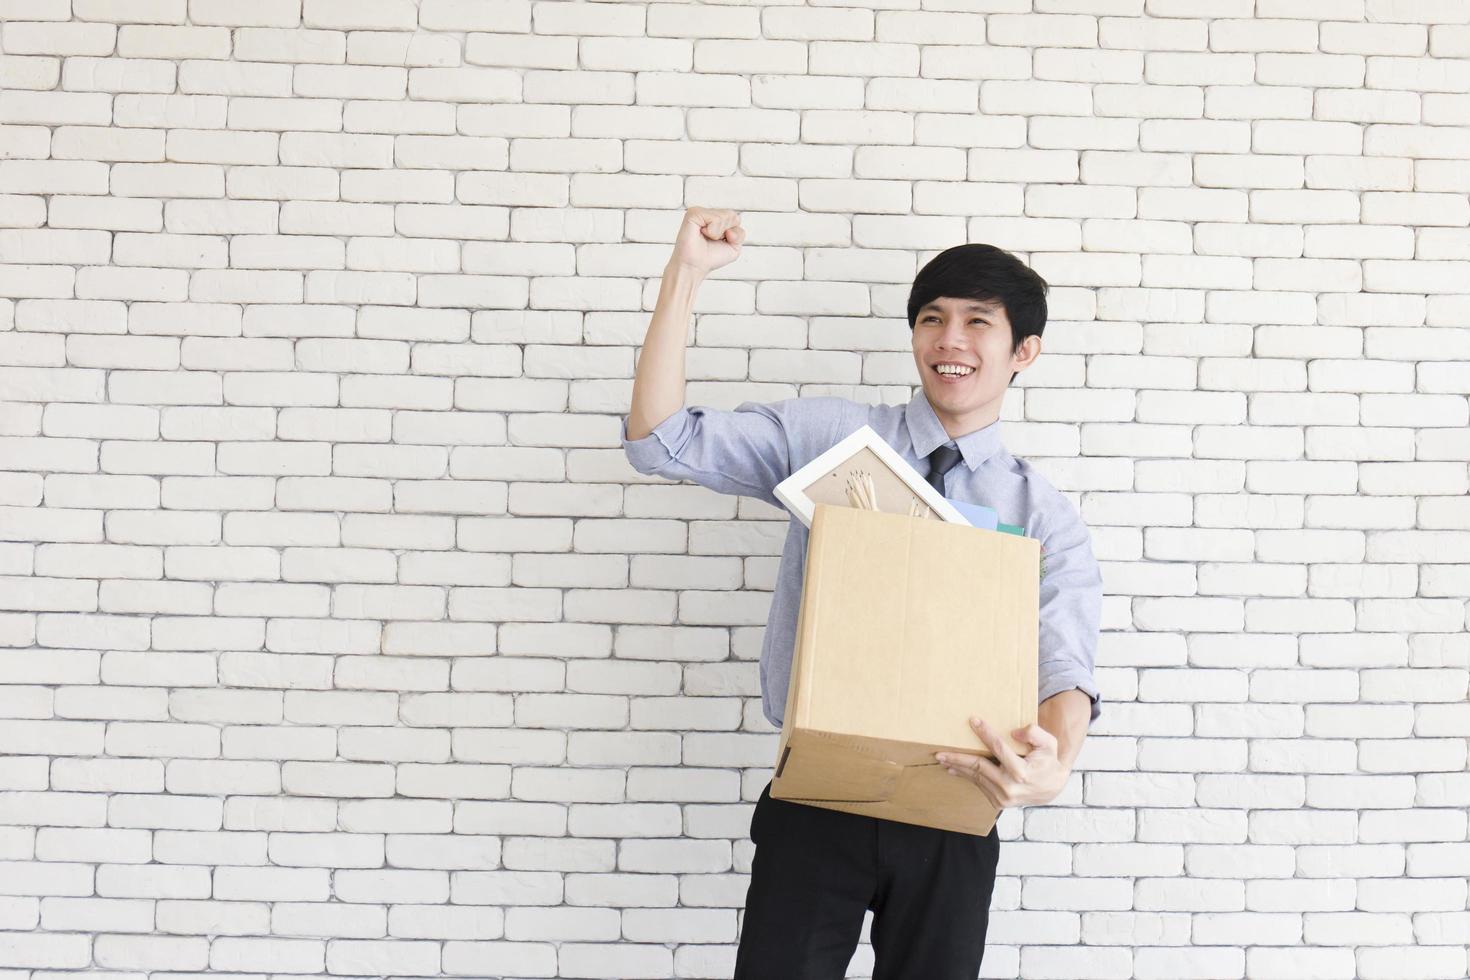 An Asian man rejoices in the office after being fired, storing personal belongings in cardboard boxes. photo